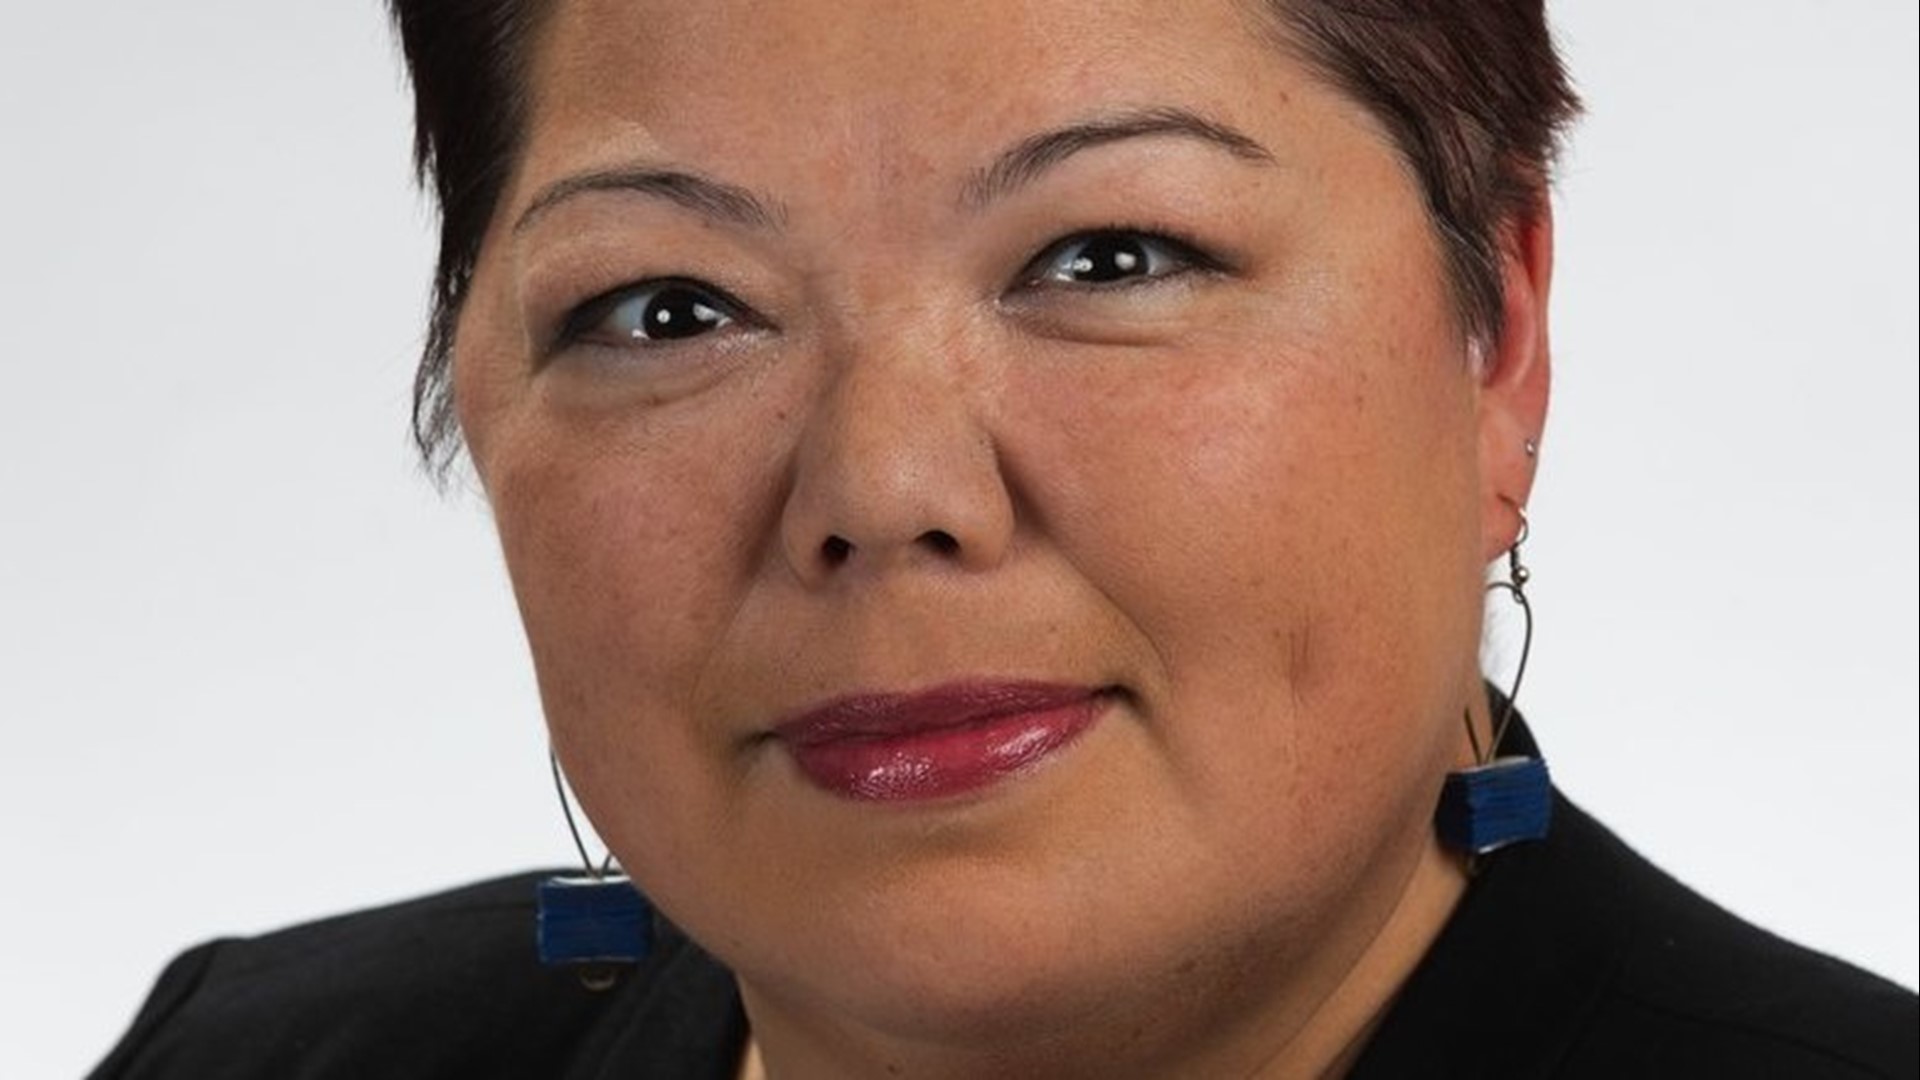 Naomi Ishisaka is Seattle Times newest columnist - tackling race, culture, and equity through a social-justice lens.